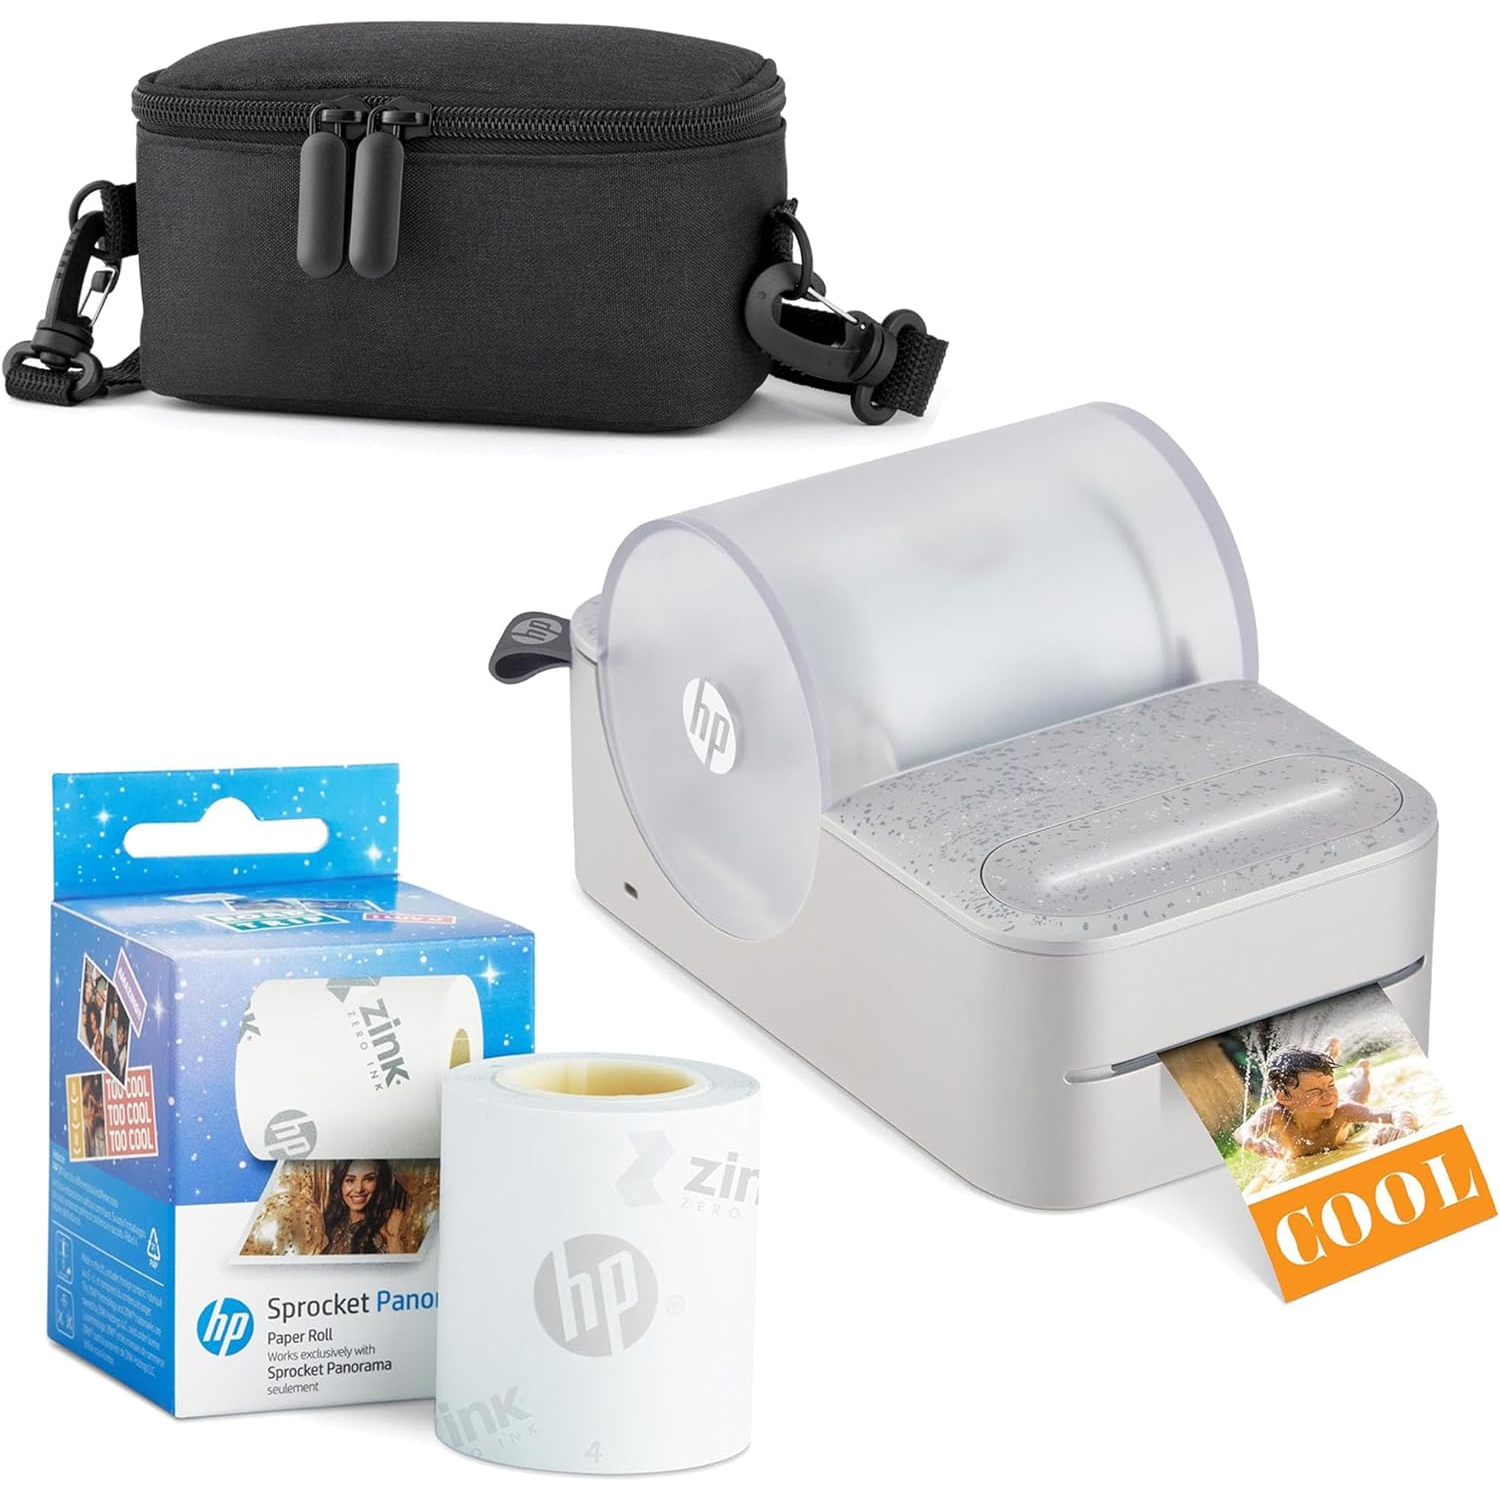 HP Sprocket Panorama Portable Color Label Printer & Photo Printer Bundle with Case & Zink Paper Roll